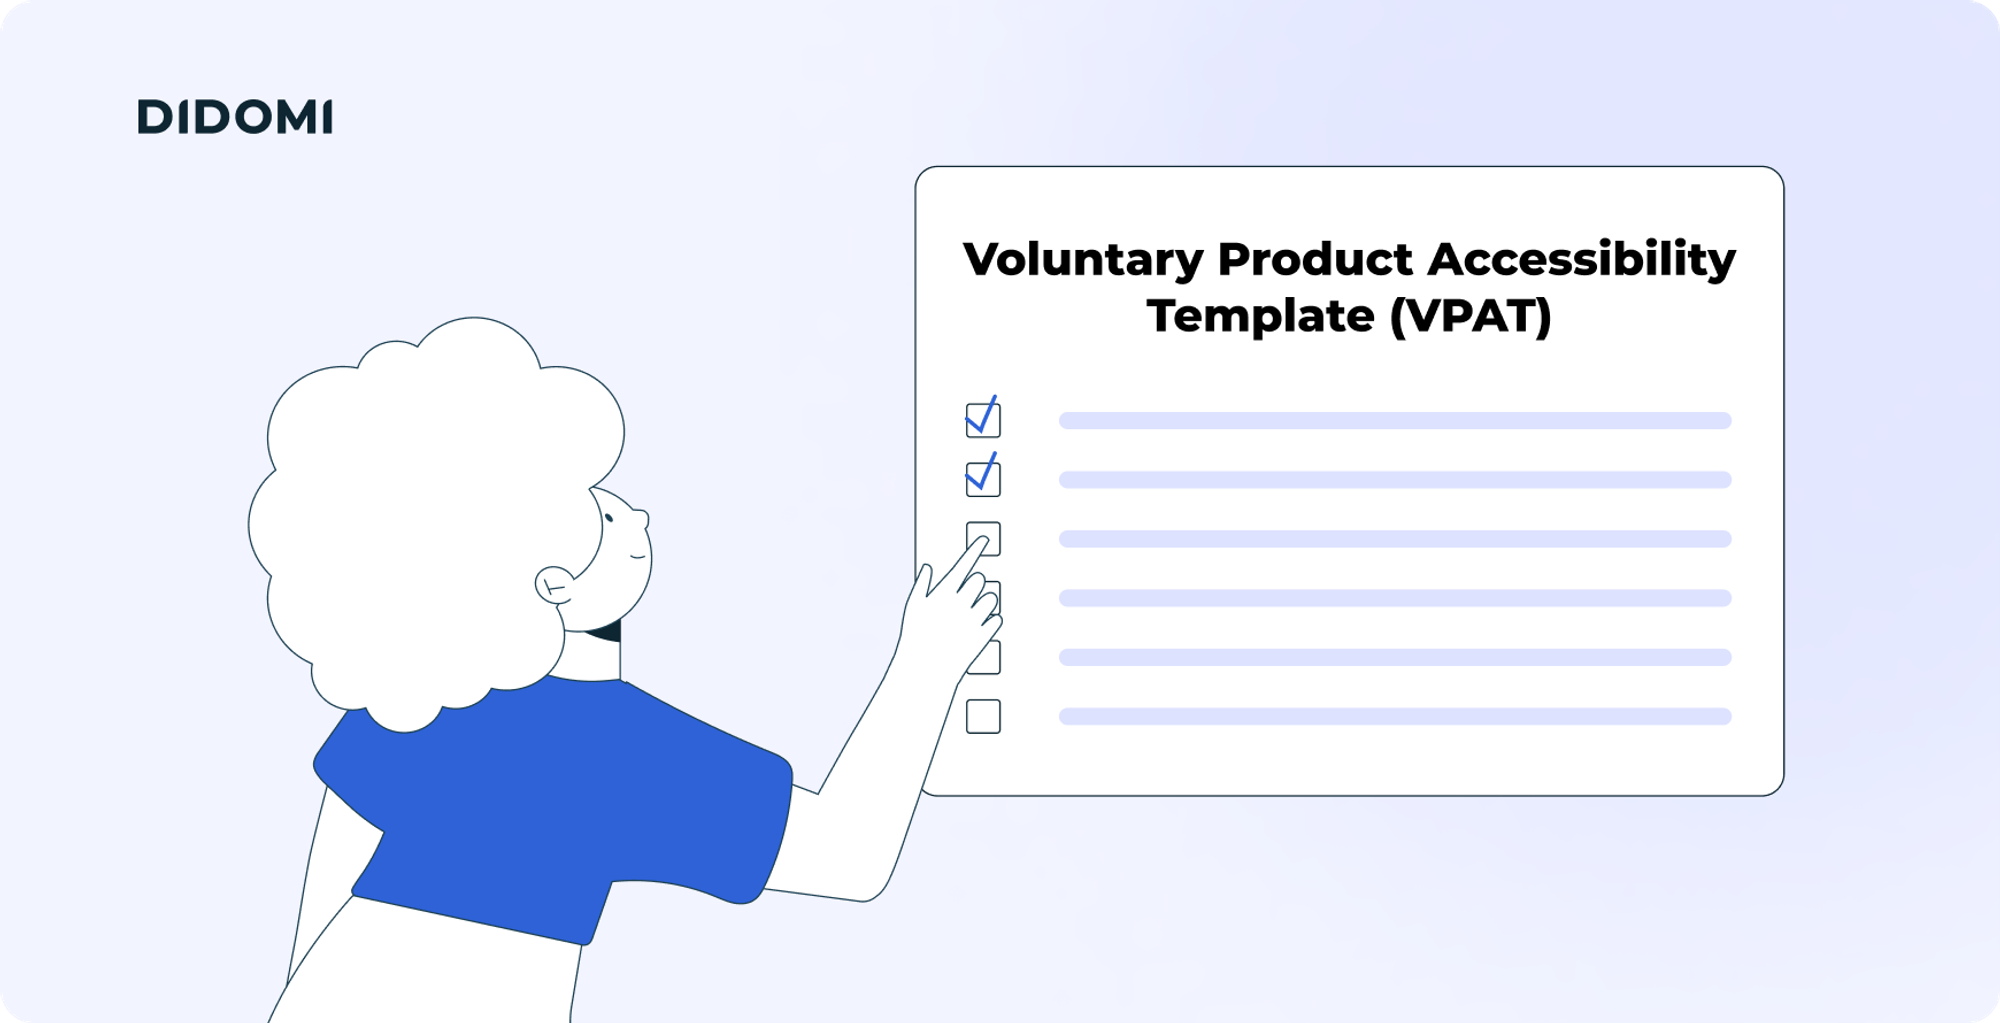 A drawing of a character with voluminous hair ticking boxes in a checklist called "Voluntary Product Accessibility Template (VPAT)"